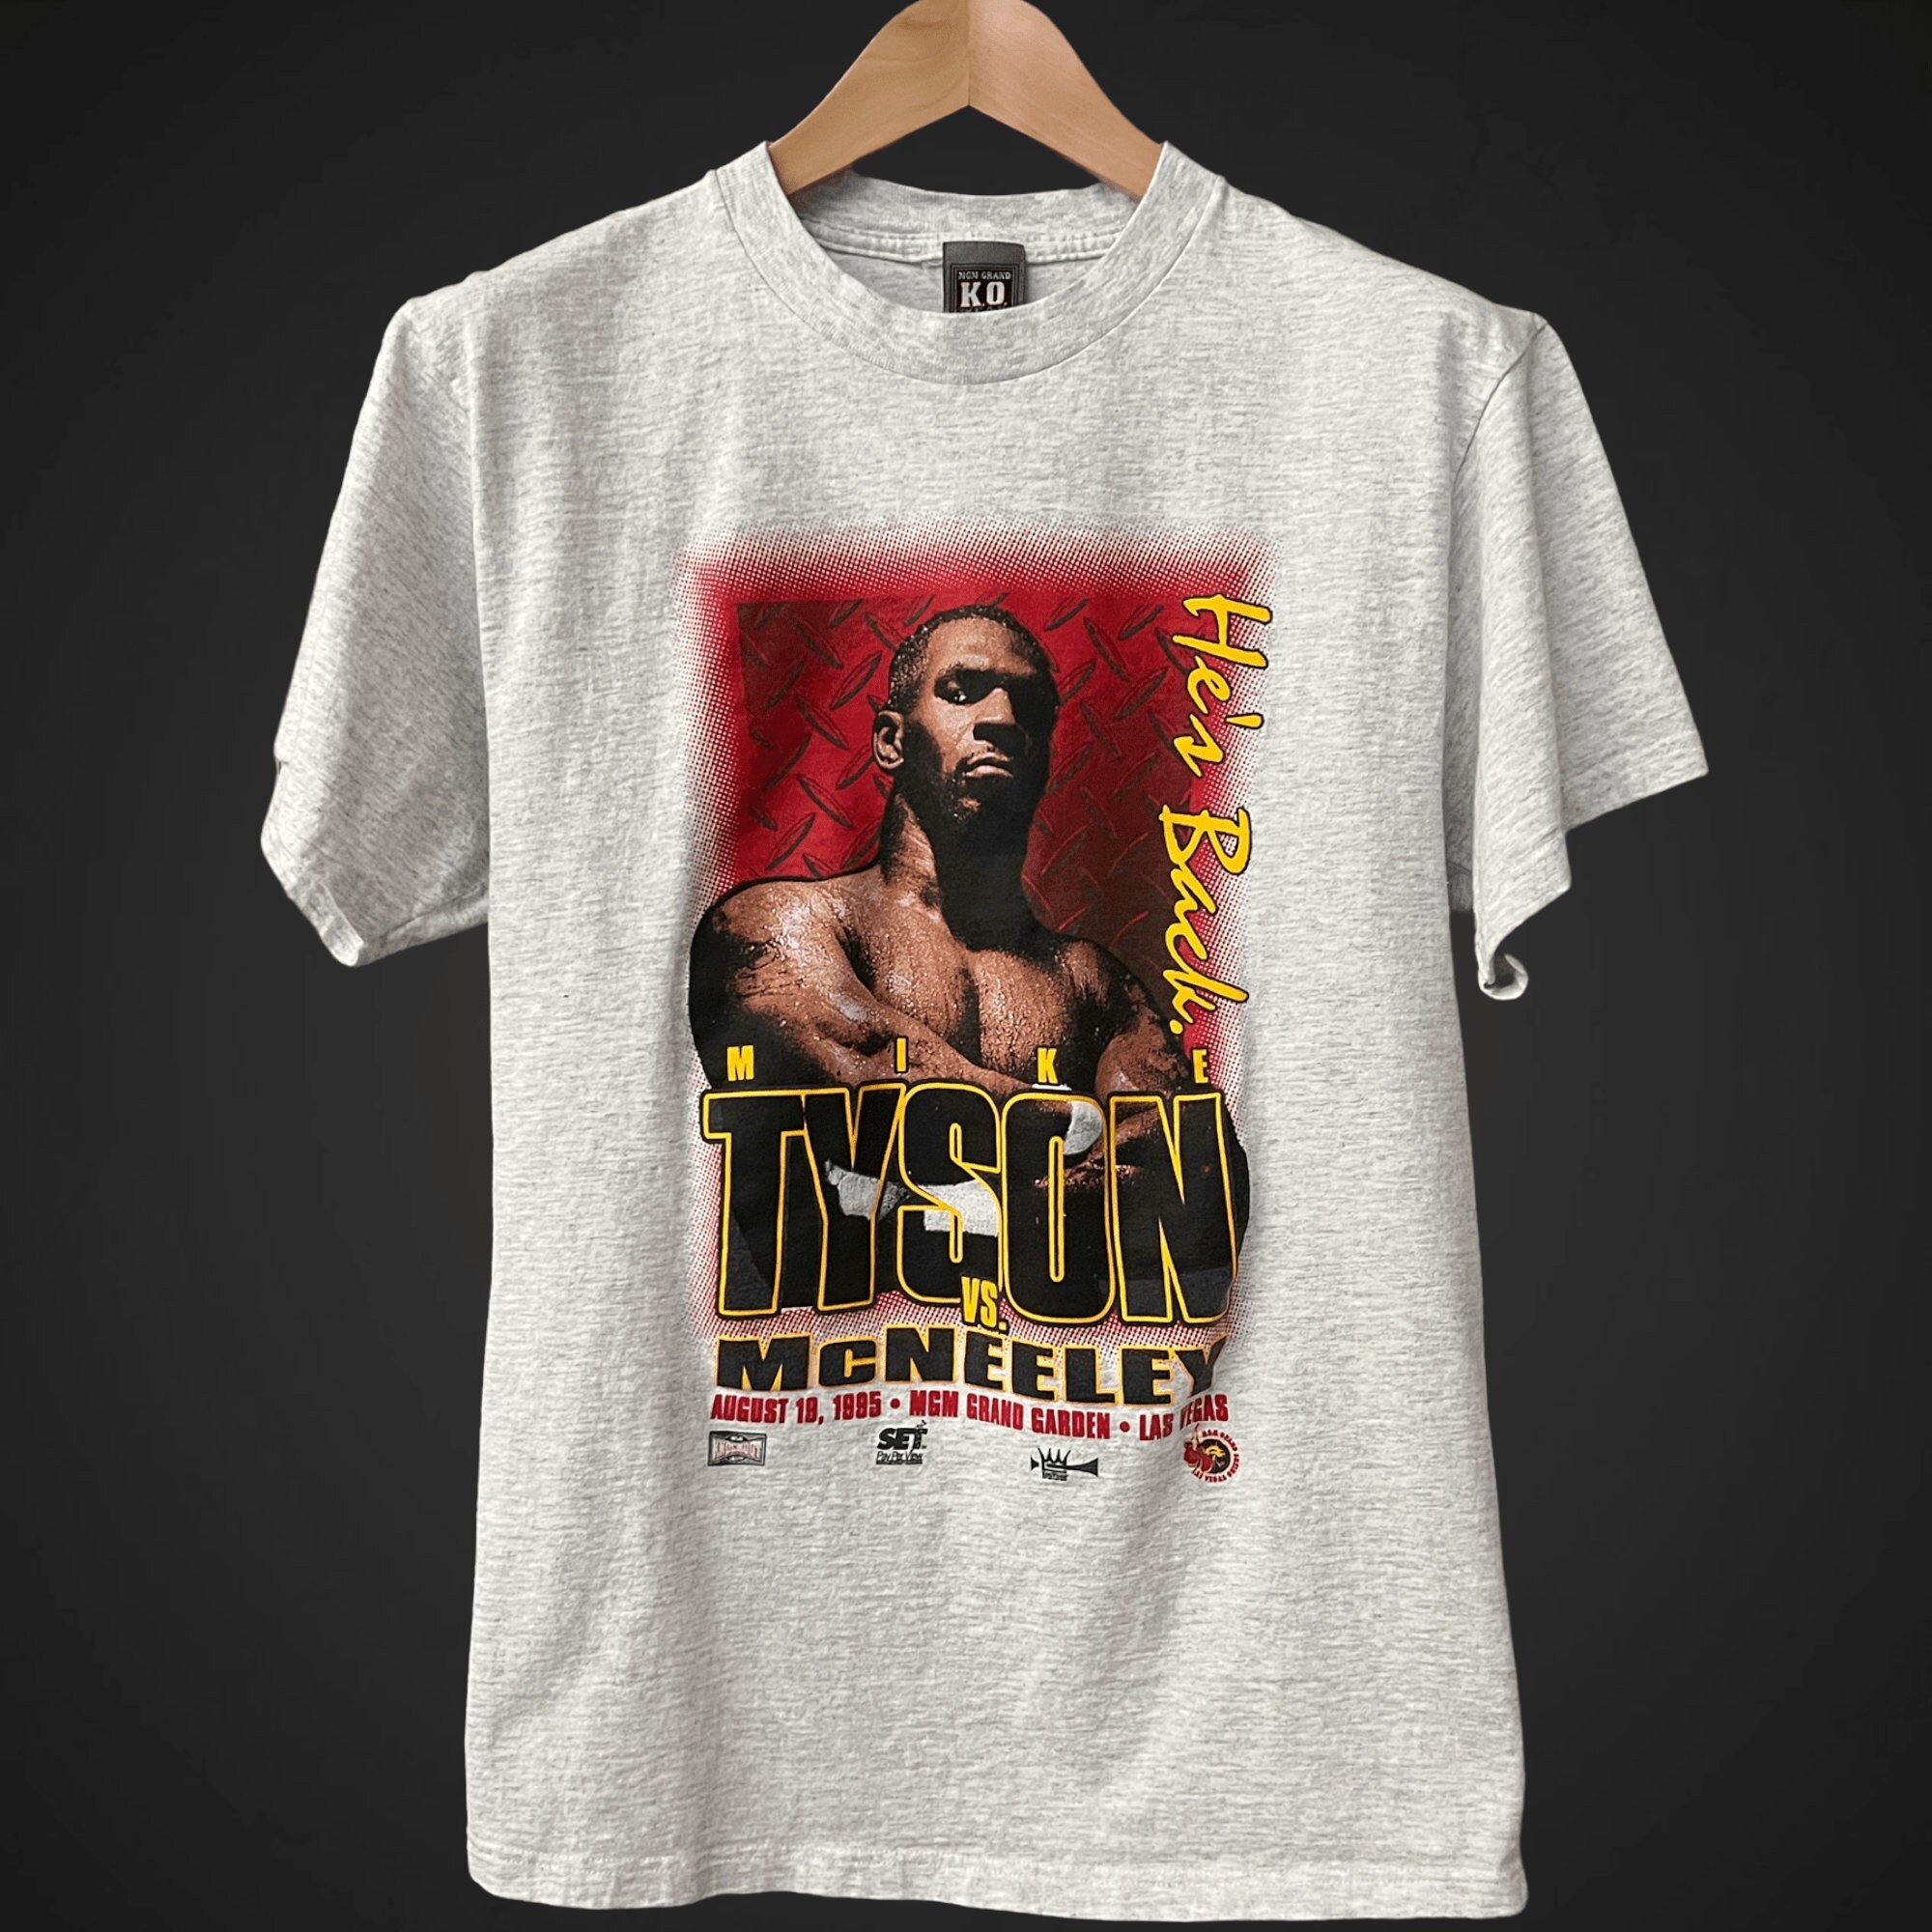 1995 Boxing Mike Tyson Peter Mcneeley Unisex T-Shirt